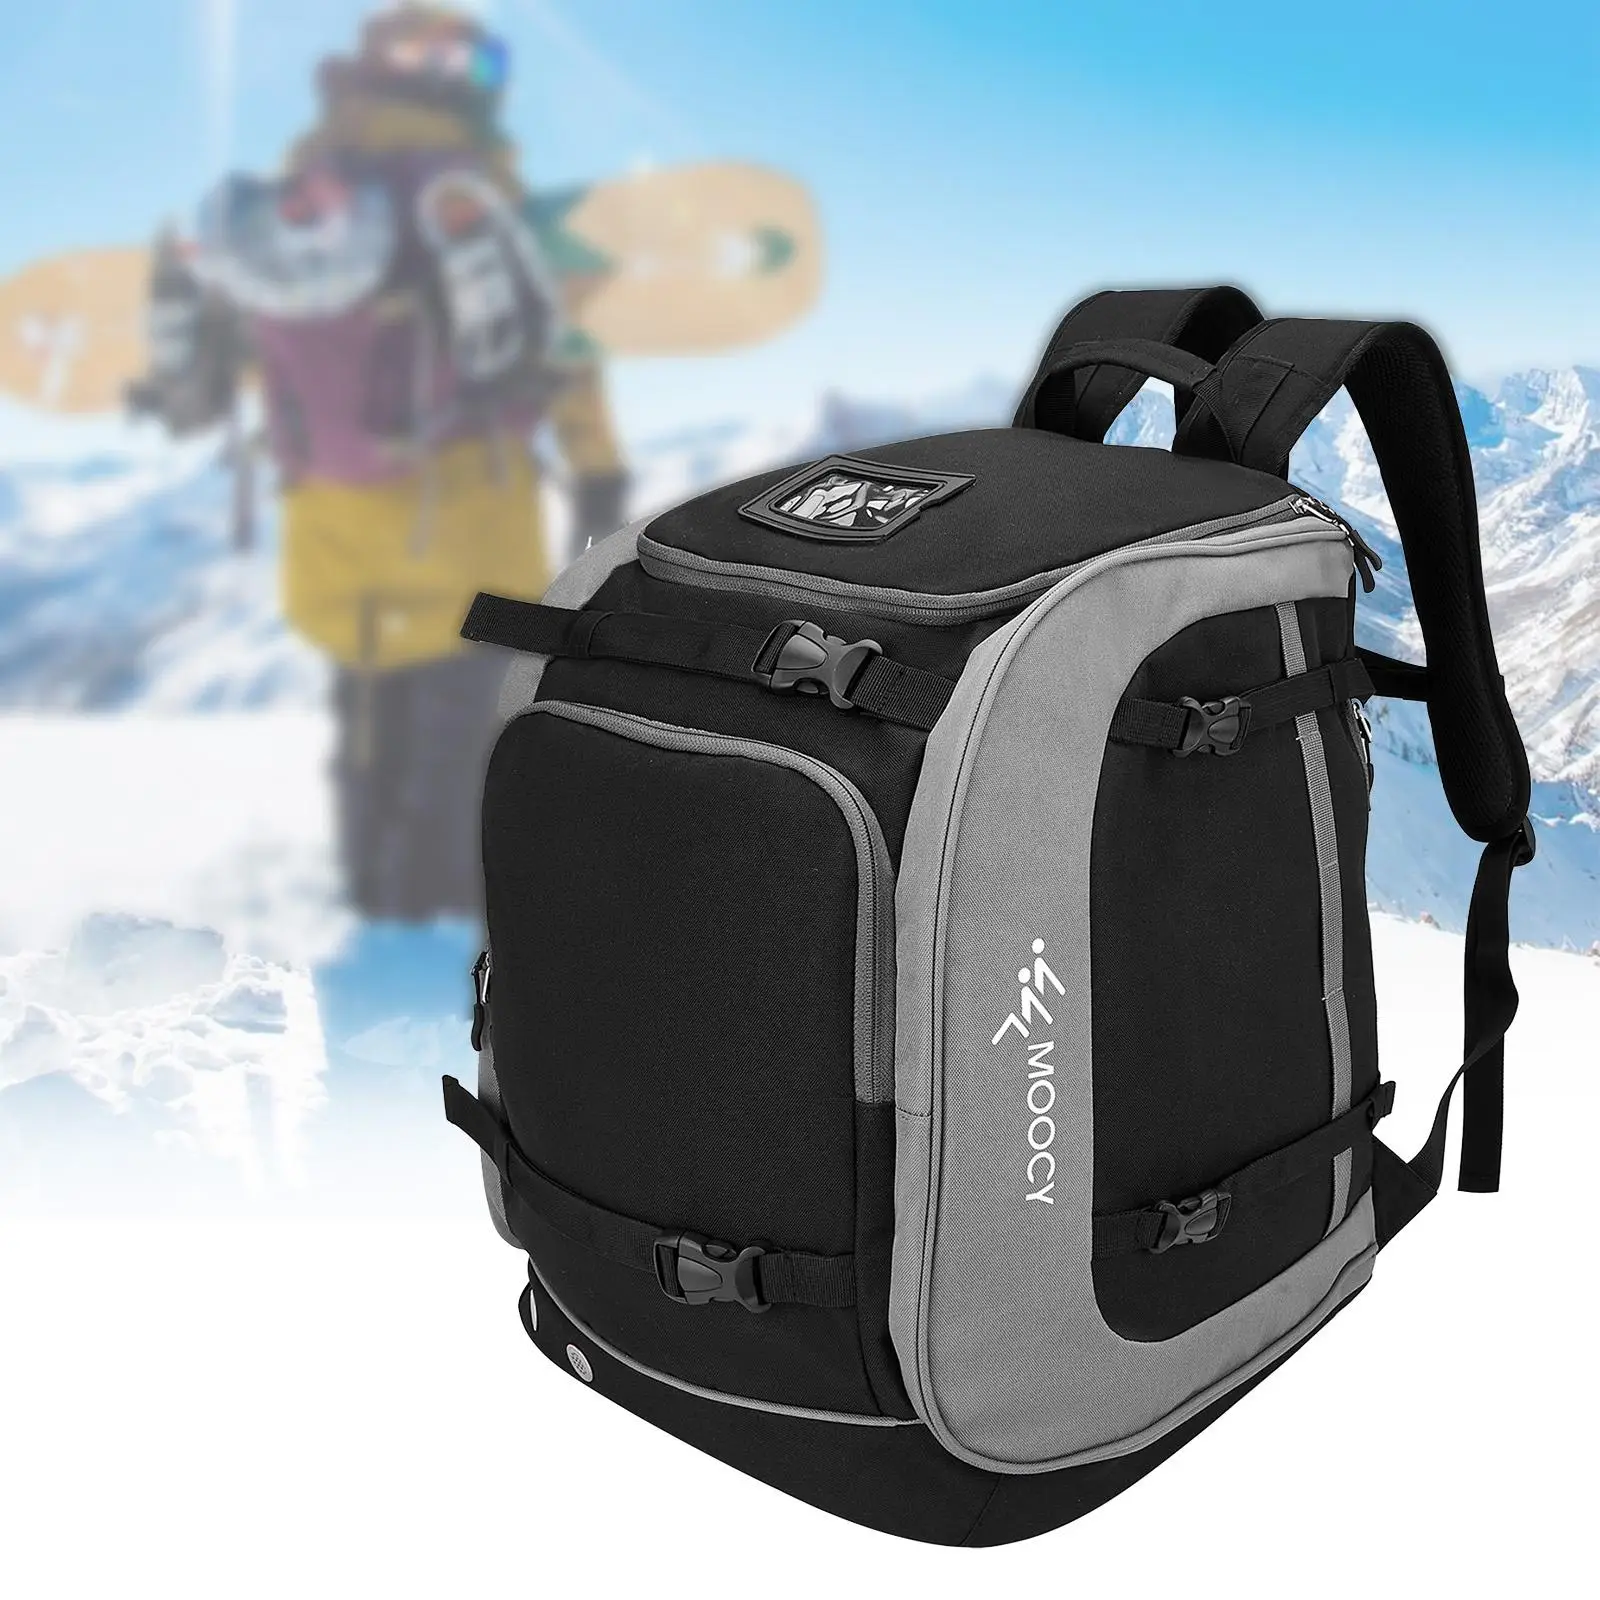 Waterproof 65L Ski Backpack Large Capacity Carrying Bag Oxford Cloth Boot Bag for Jacket Outdoor Travel Gloves Goggles